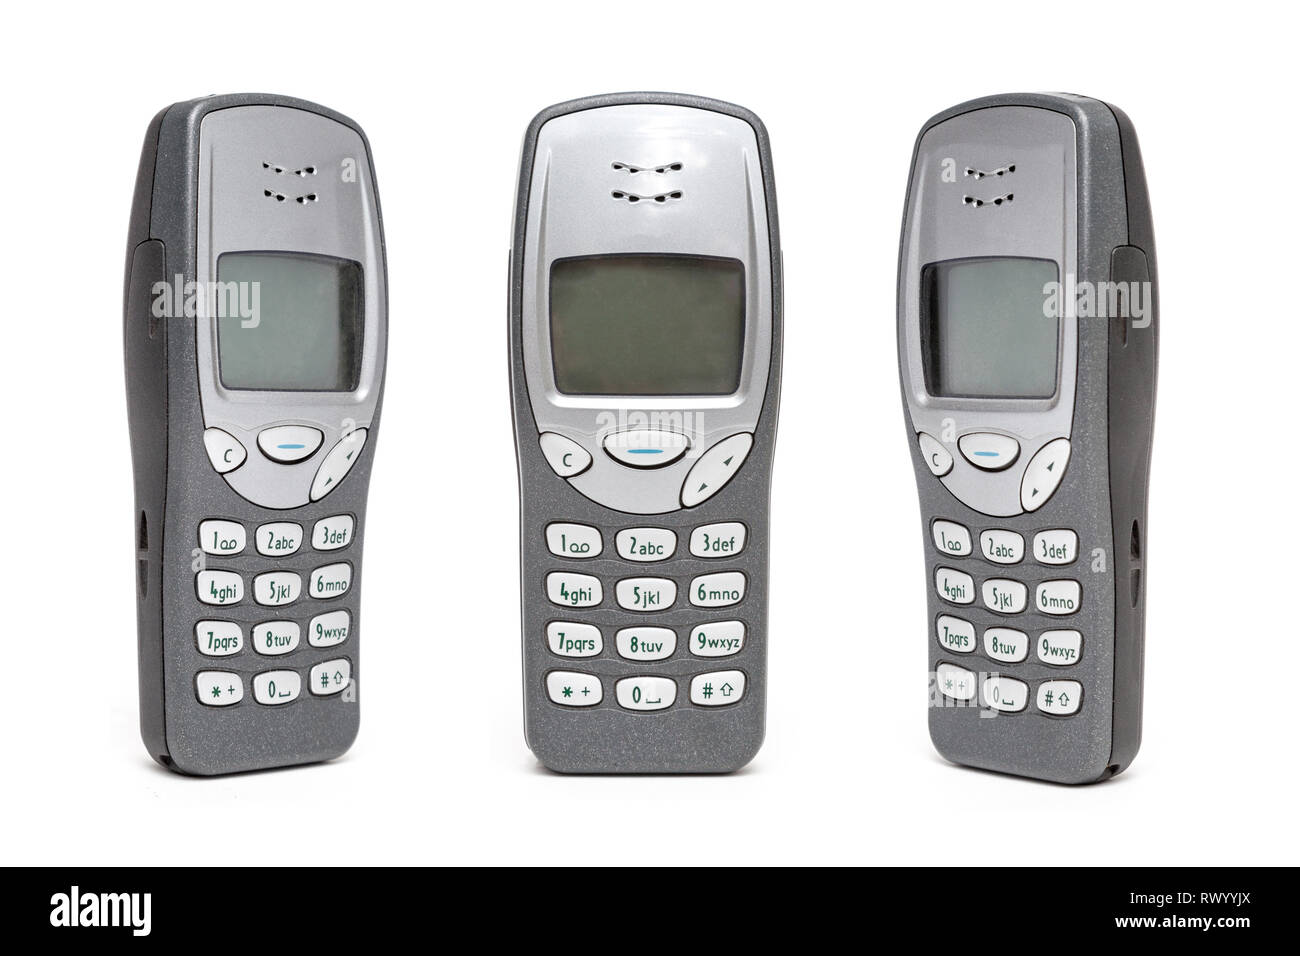 Old Mobile Phone on white background. Stock Photo